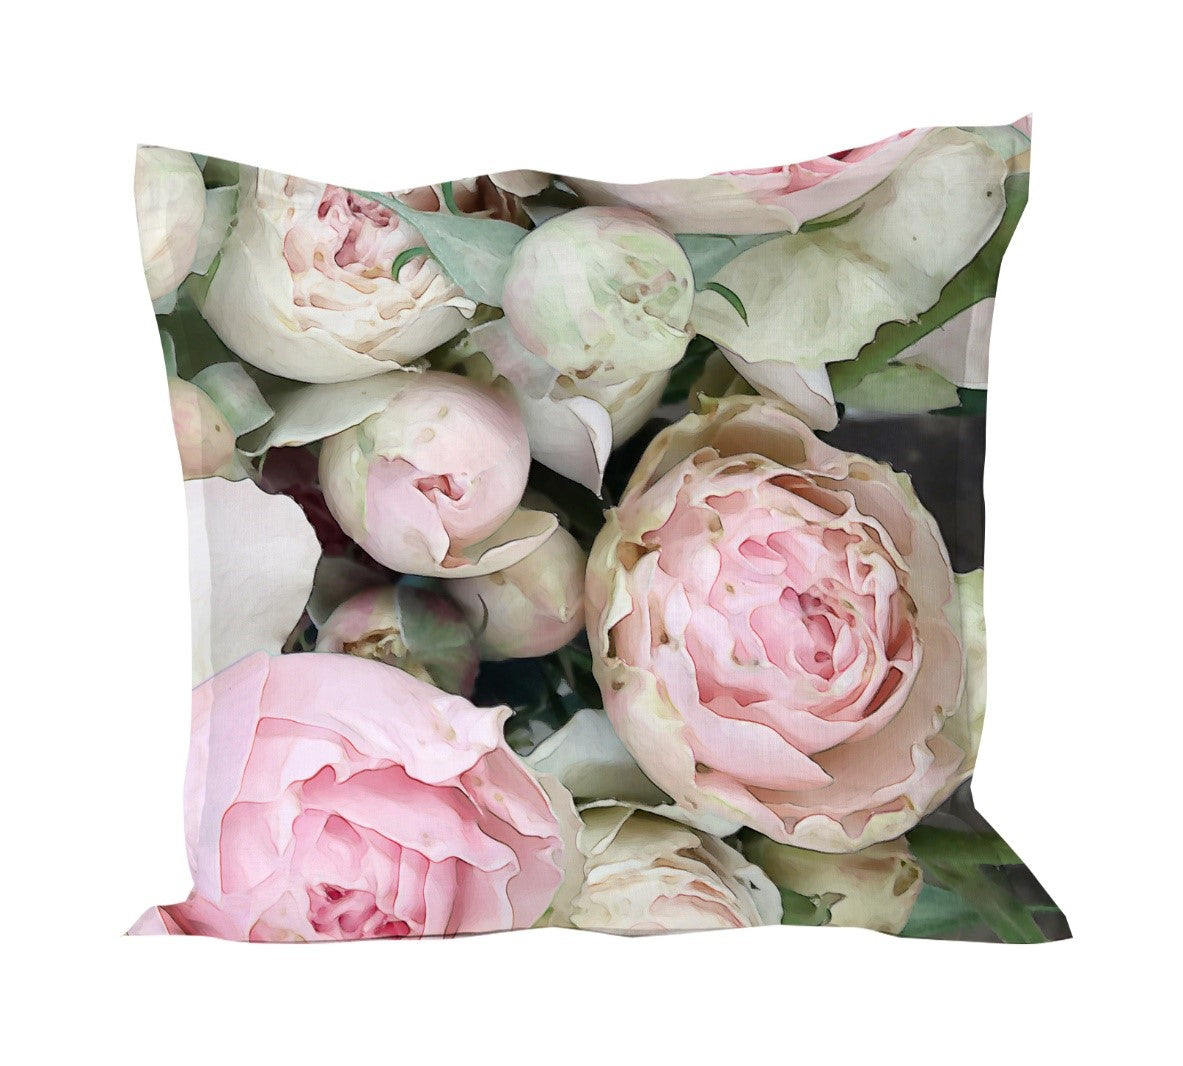 Cushion cover in Rose Soft Pink